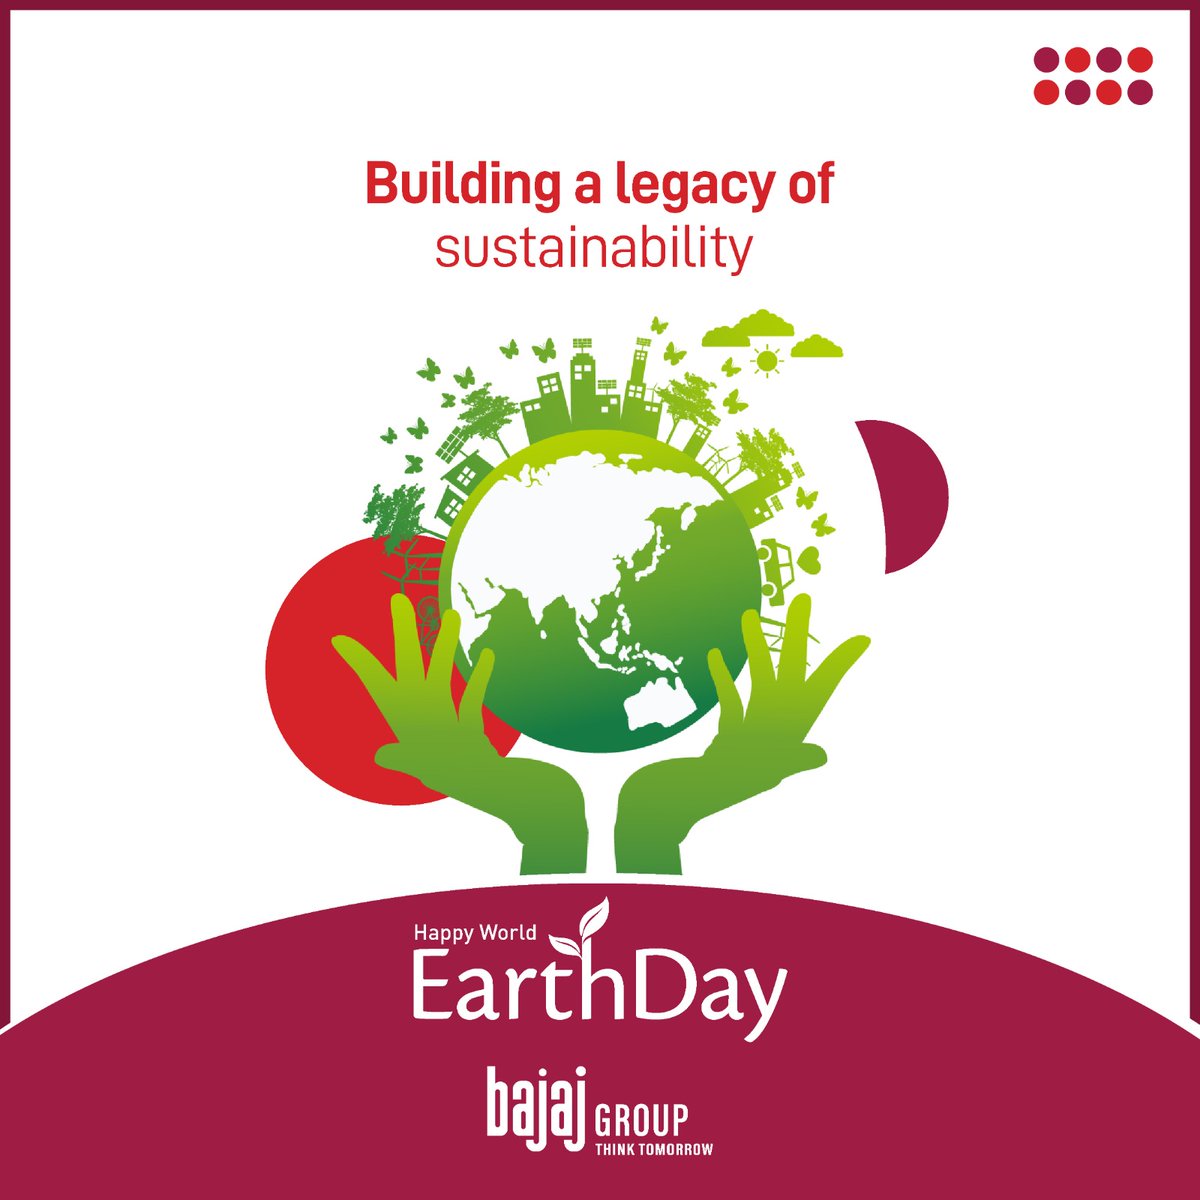 Today on World Earth Day, we celebrate our planet and reaffirm our commitment to a greener future. Together, let’s nurture the Earth that nurtures us. #WorldEarthDay #BajajGroup #LifeAtBajaj #ValueForLife #ThinkTomorrow